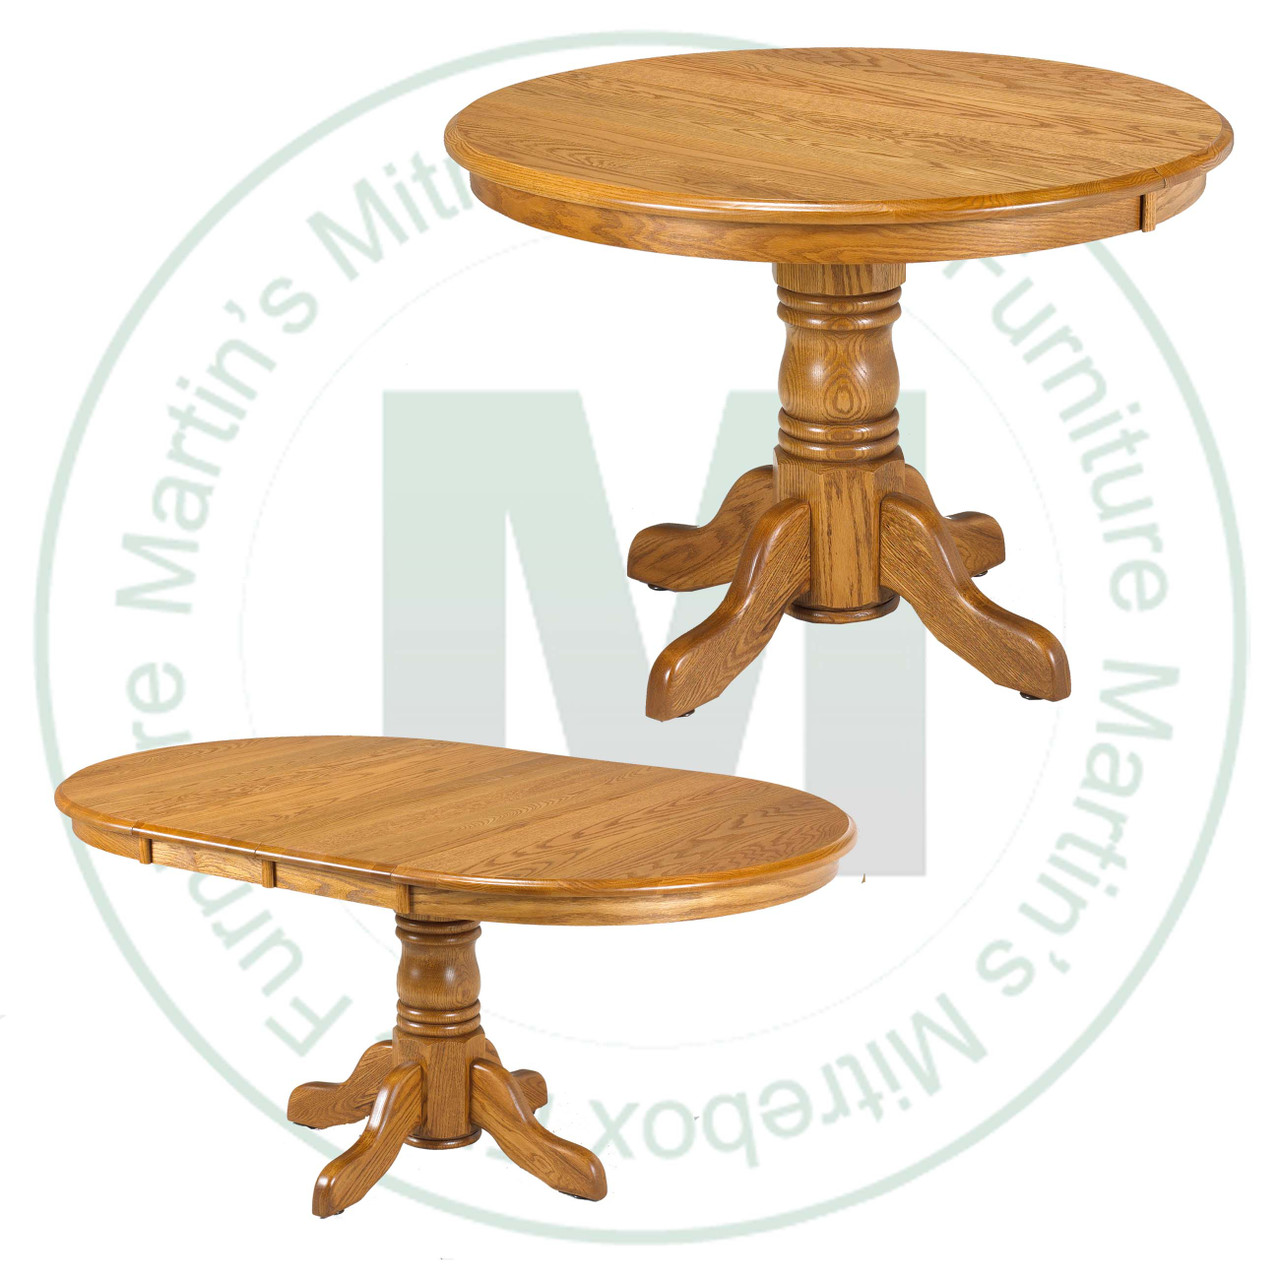 Maple Lancaster Collection Single Pedestal Table 36''D x 48''W x 30''H With 2 - 12'' Leaves. Table Has 1'' Thick Top